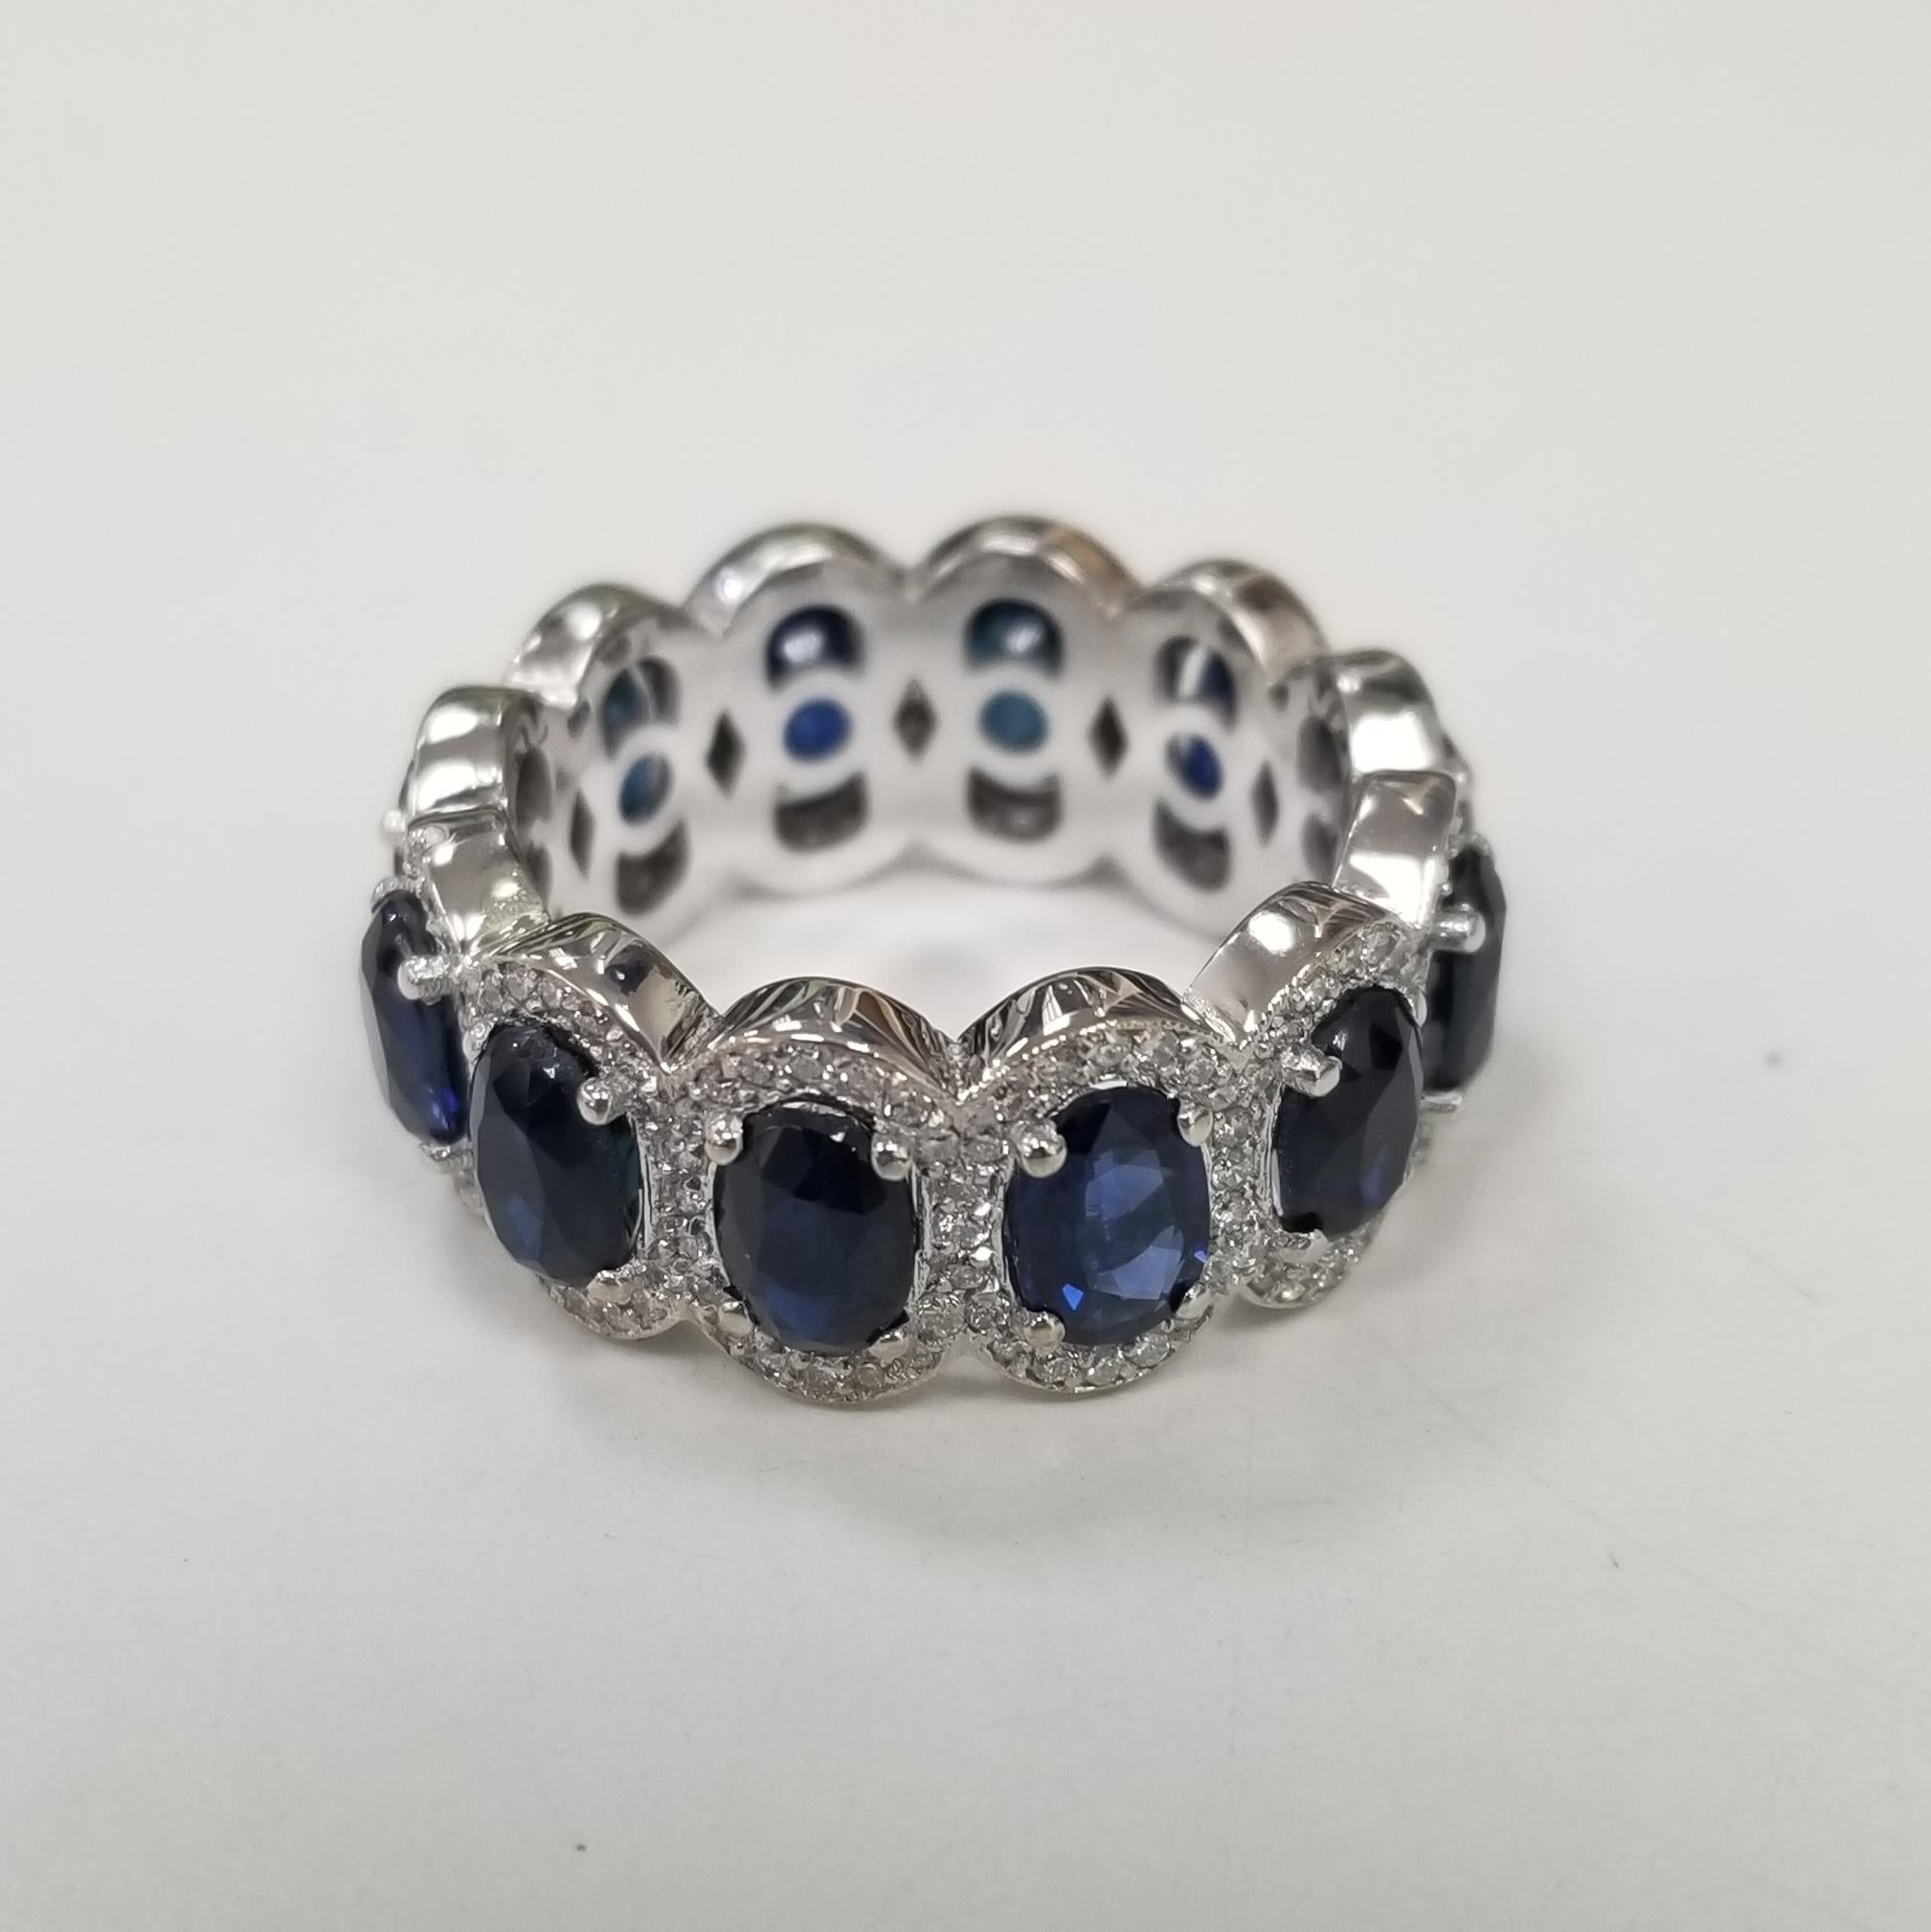 A breathtakingly beautiful diamond wedding band featuring 12 oval cut blue sapphires set in 14k white gold surrounded by a diamond halo. This seamless eternity band is expertly crafted surely will catch eyes. It measures 9.5mm wide. This classic